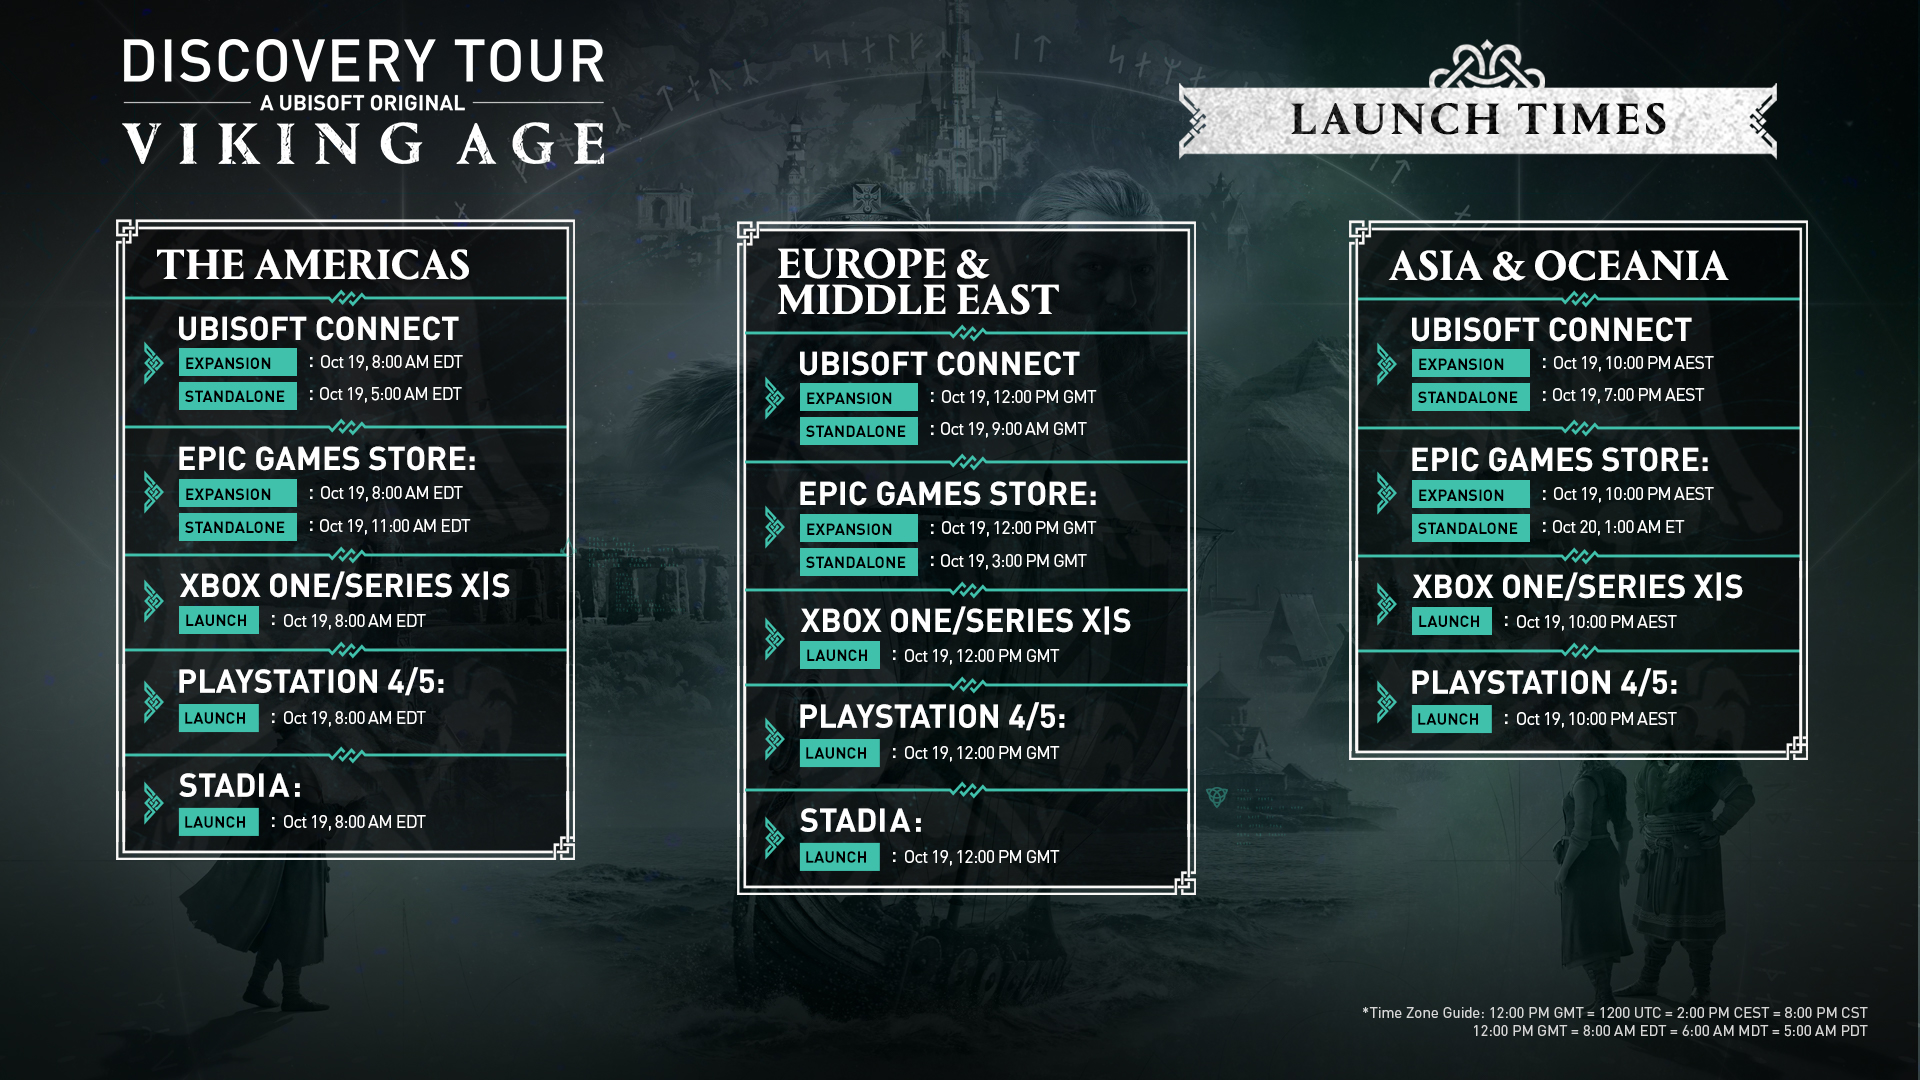 Assassin's Creed on Twitter: "Ready to new horizons? 📢 Check out the approximate release timings for Discovery Tour: Age - out #AssassinsCreed ⏰ https://t.co/cZdSfprkIr" / Twitter